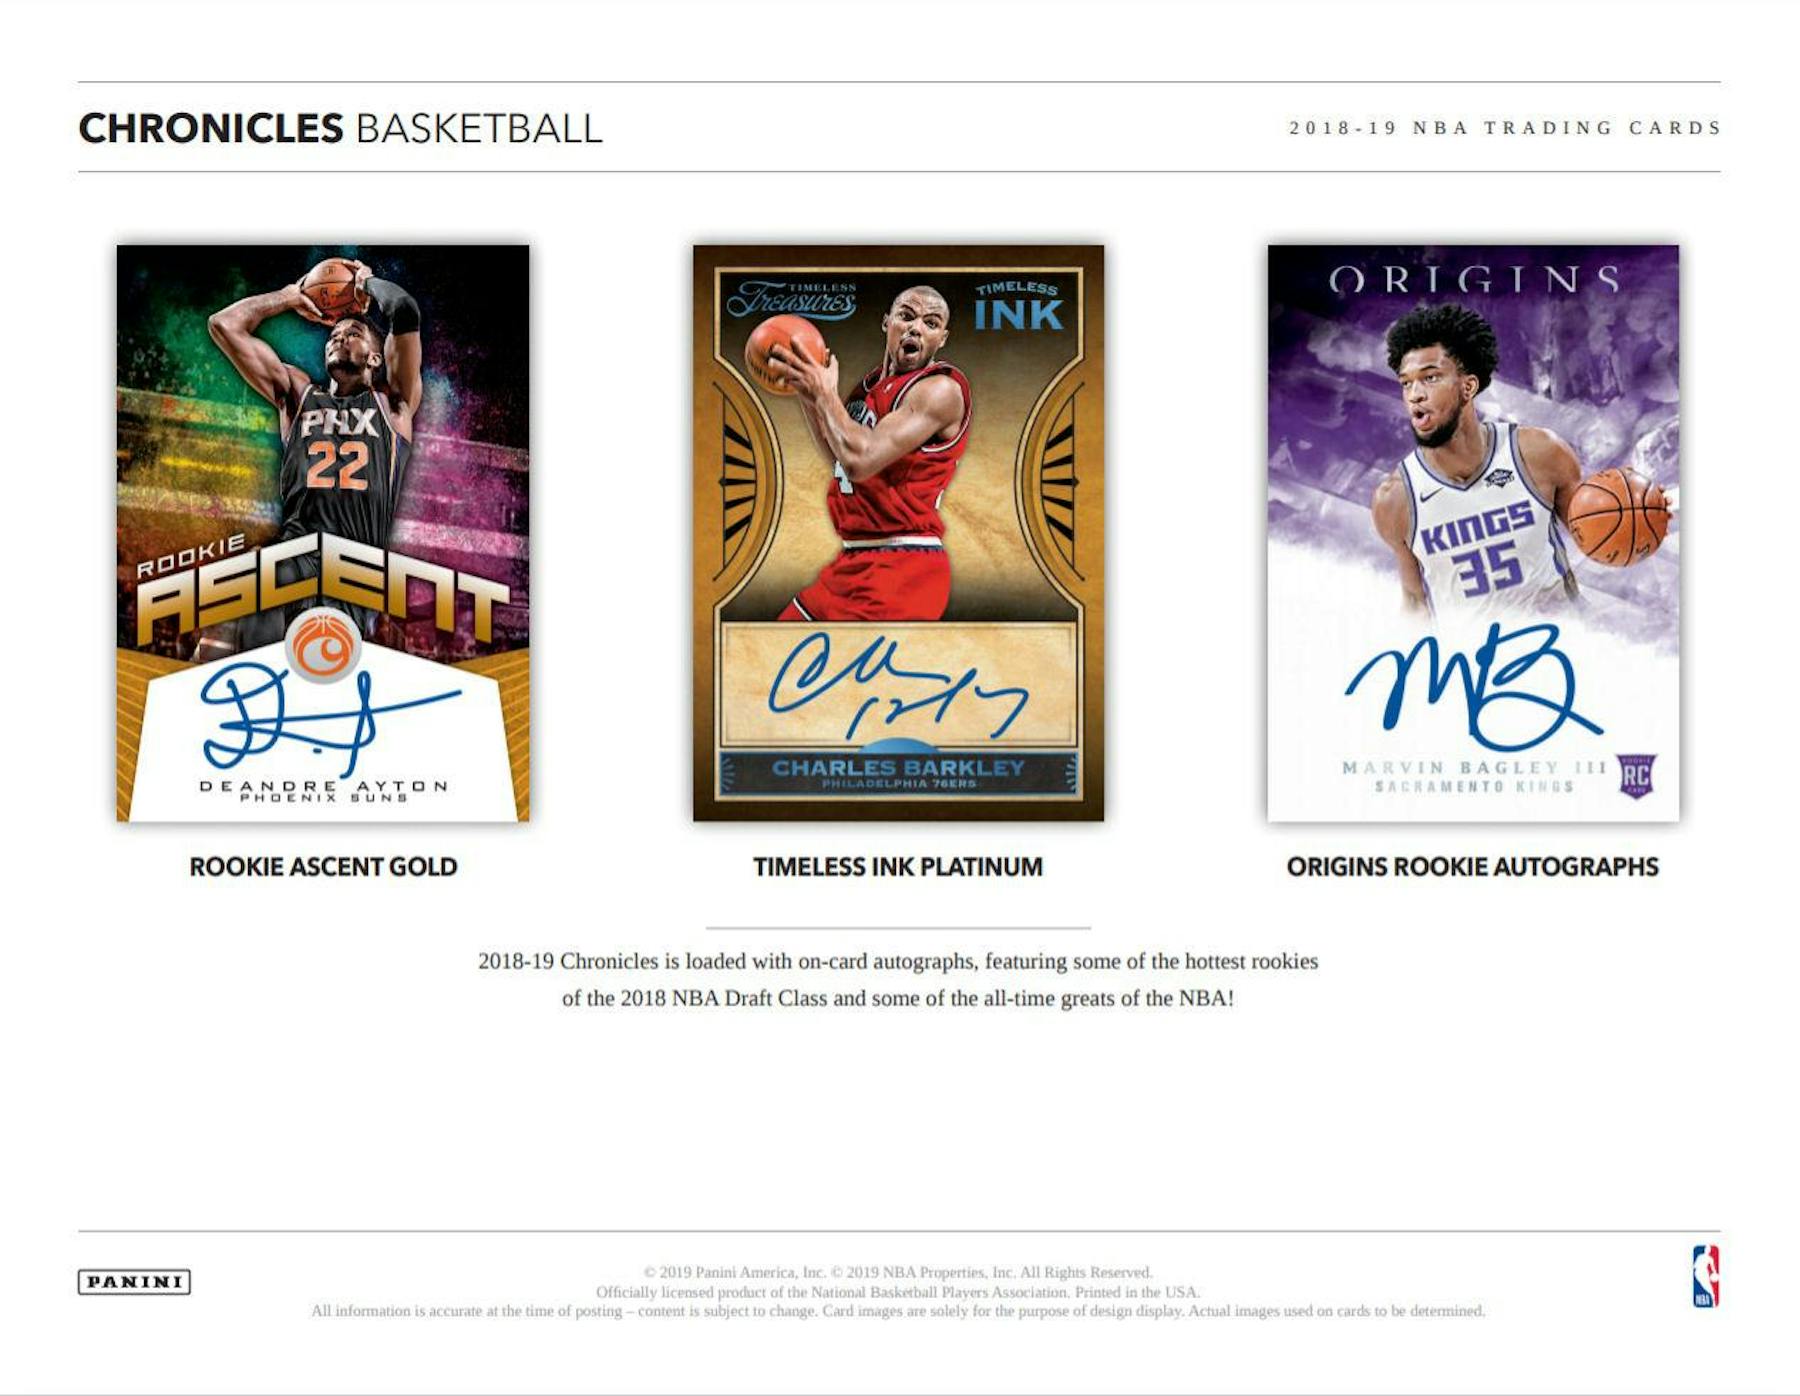 2018-19 Panini Chronicles Basketball Hanger Box- Featuring Luka Doncic and  Trae Young, On card Signatures Retail Exclusives